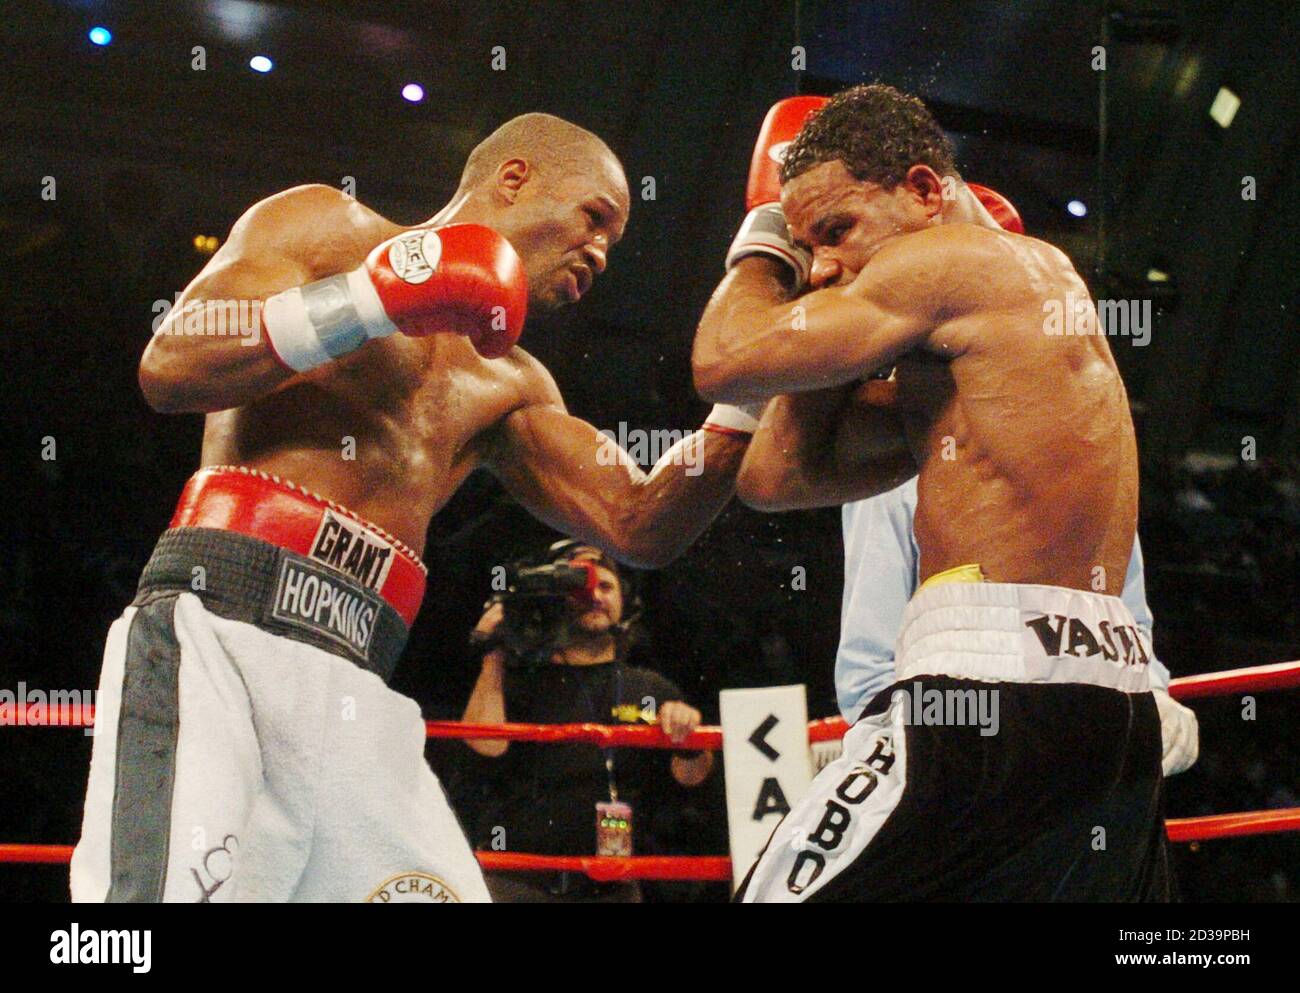 Undisputed middleweight champion Bernard Hopkins (L) lands a punch on his  opponent William Joppy (R) during the first round of their twelve round  fight in Atlantic City, December 13, 2003. Hopkins won